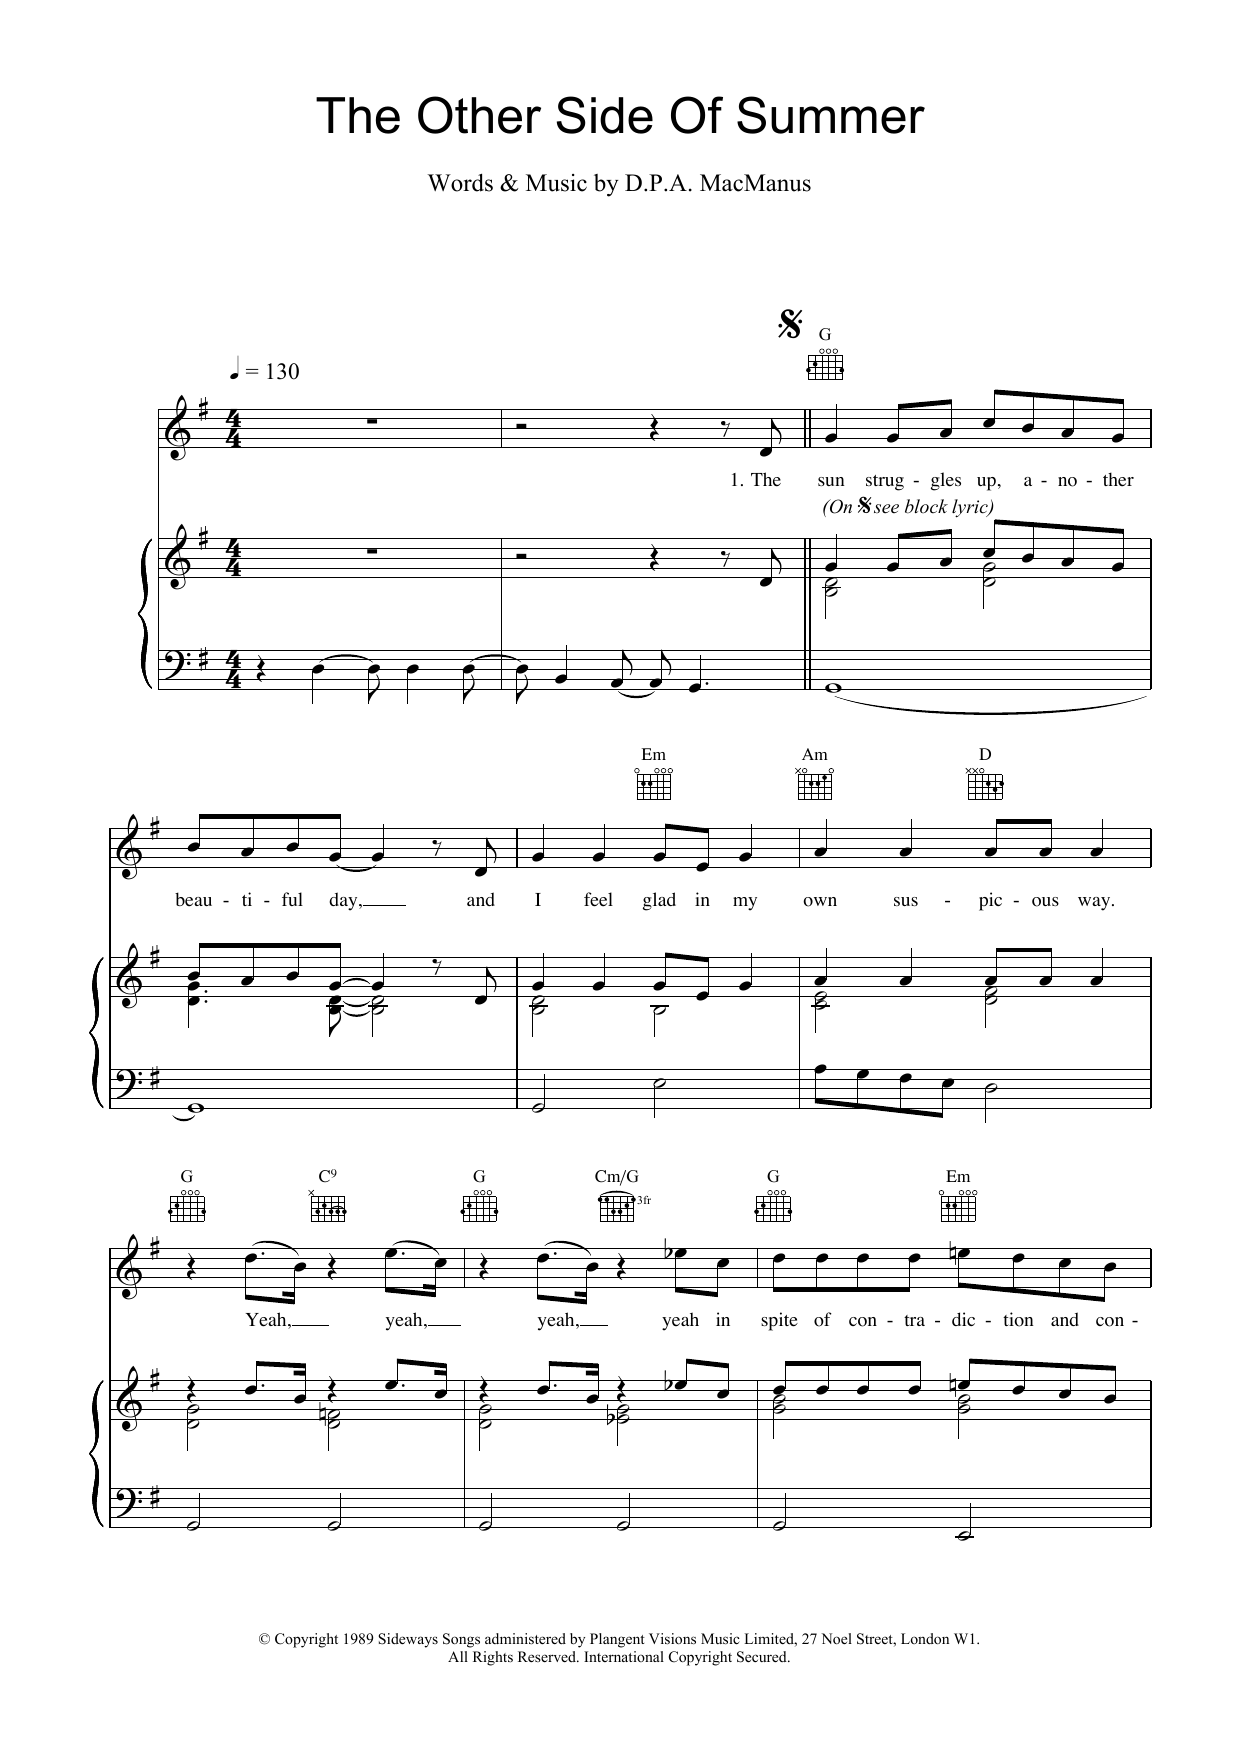 The Other Side Of Summer sheet music